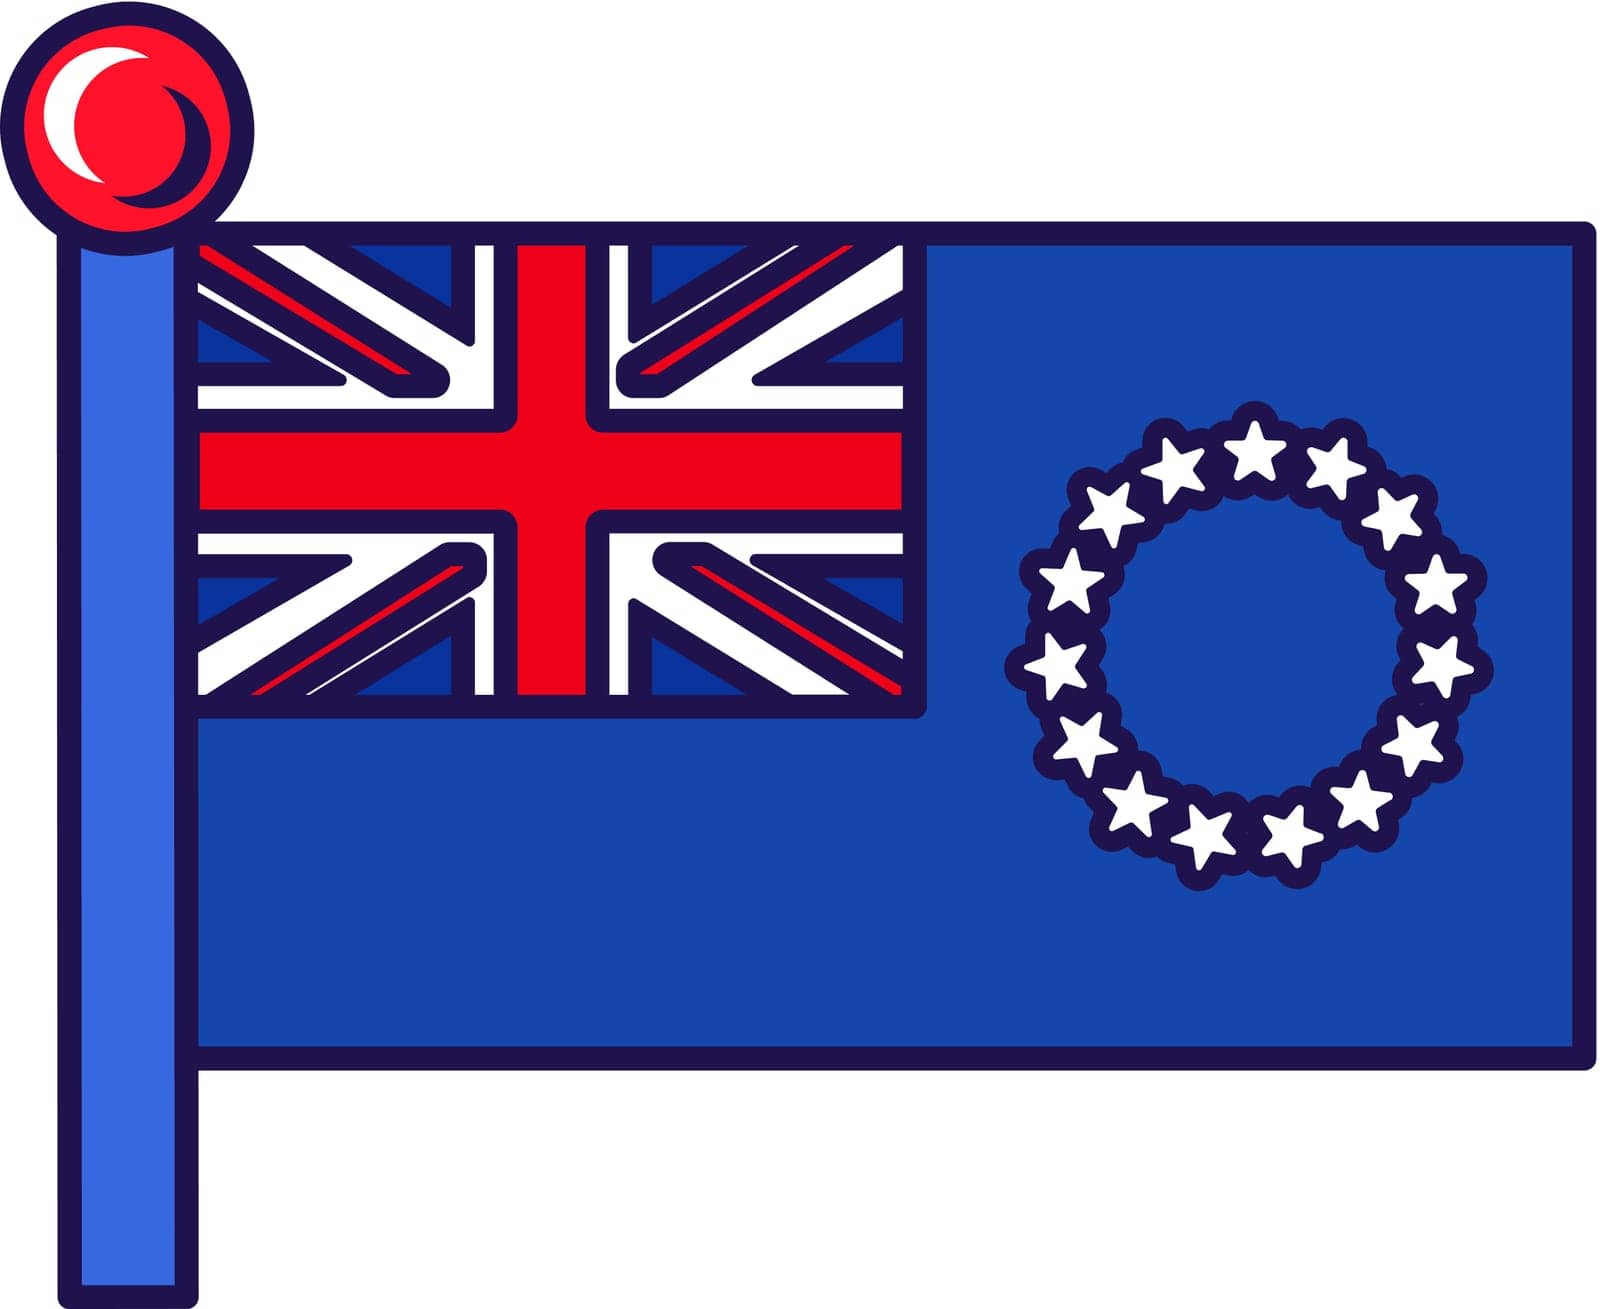 Cook island ensign civil flag on flagstaff vector. Stars ring on blue background and england symbol on national territory traditional insignia. Pacific region flat cartoon illustration